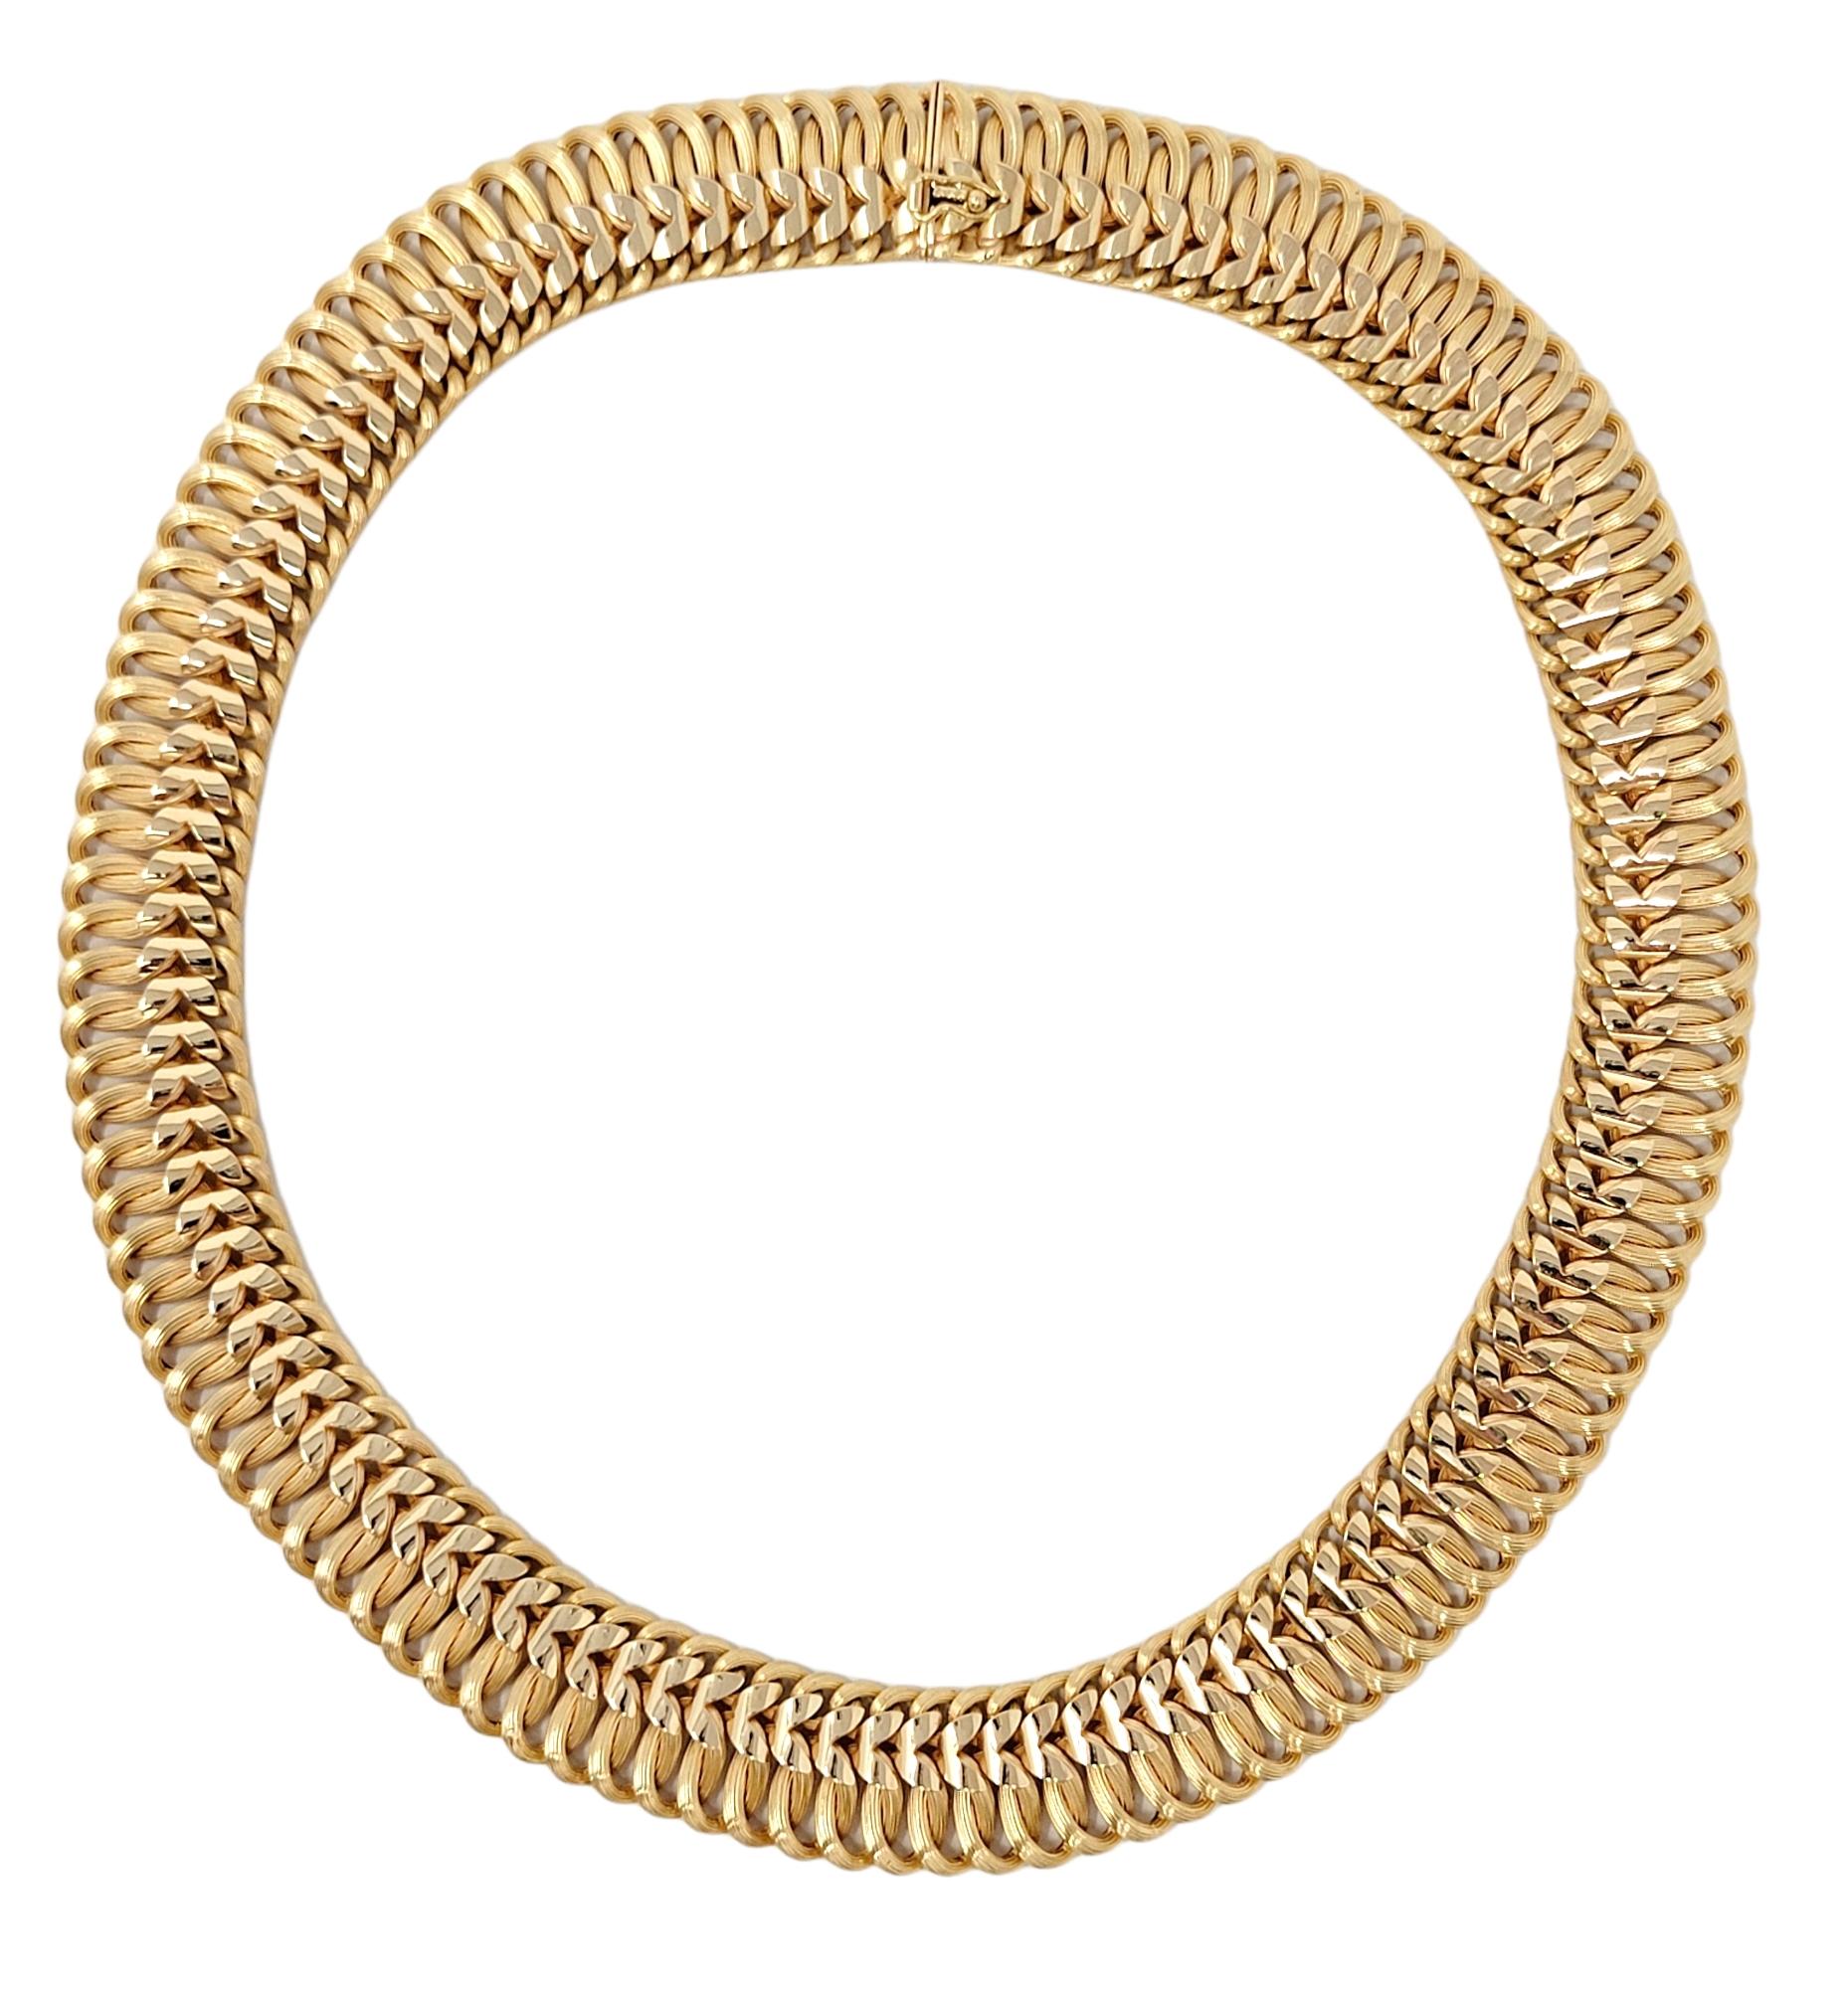 Modern and elegant 18 karat yellow gold woven link necklace. This versatile piece can be dressed up or down and worn with just about everything. The flexible design gently hugs the neck, while the subtle textural contrast of the metal gives this